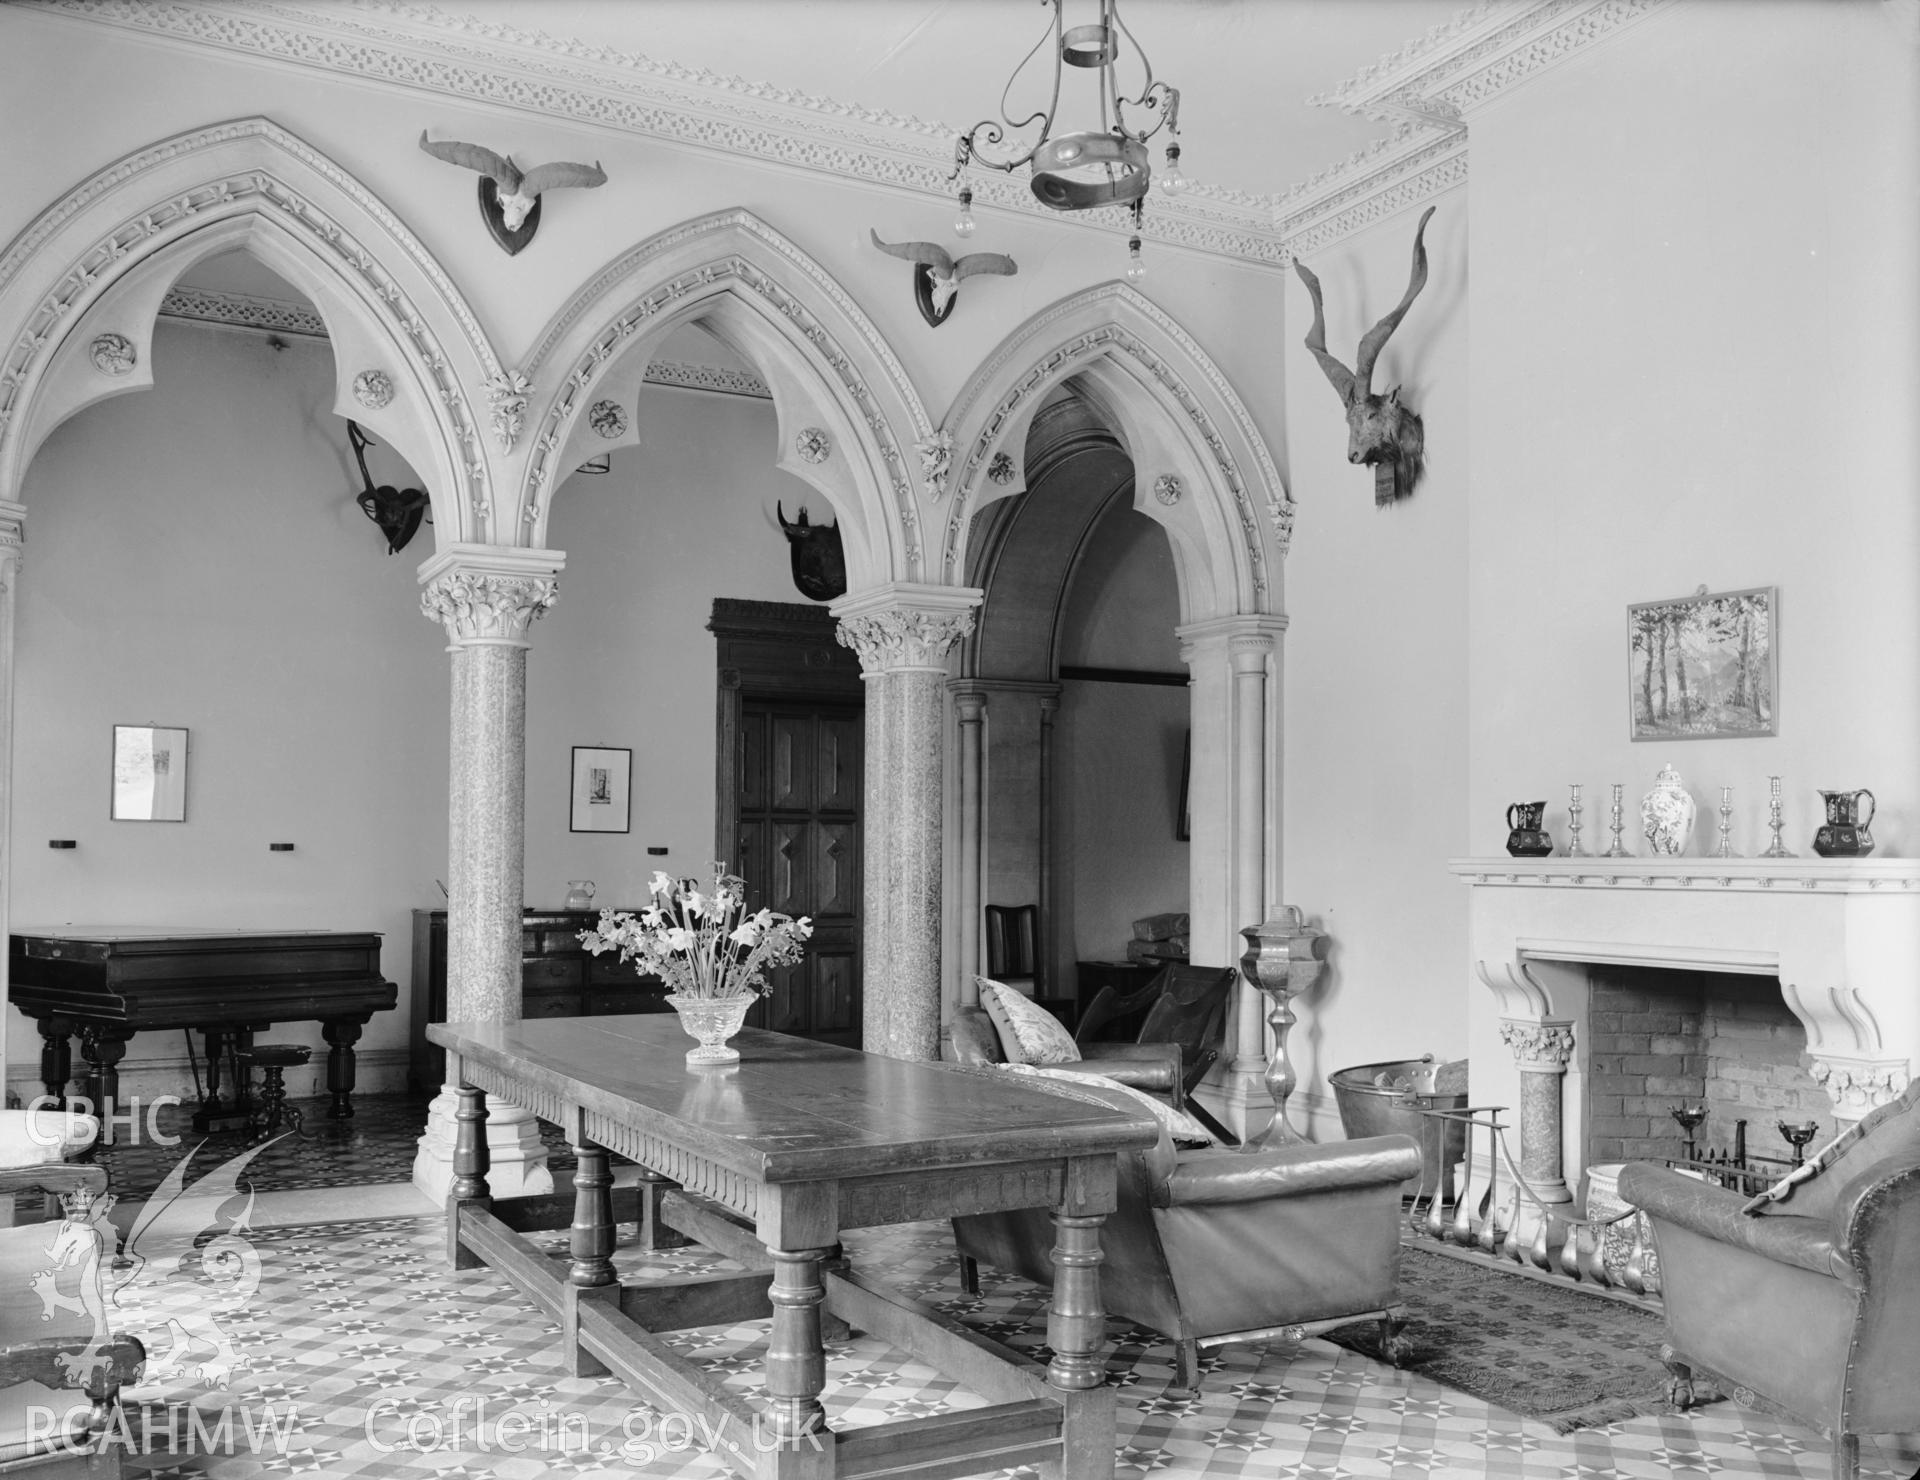 The drawing room.